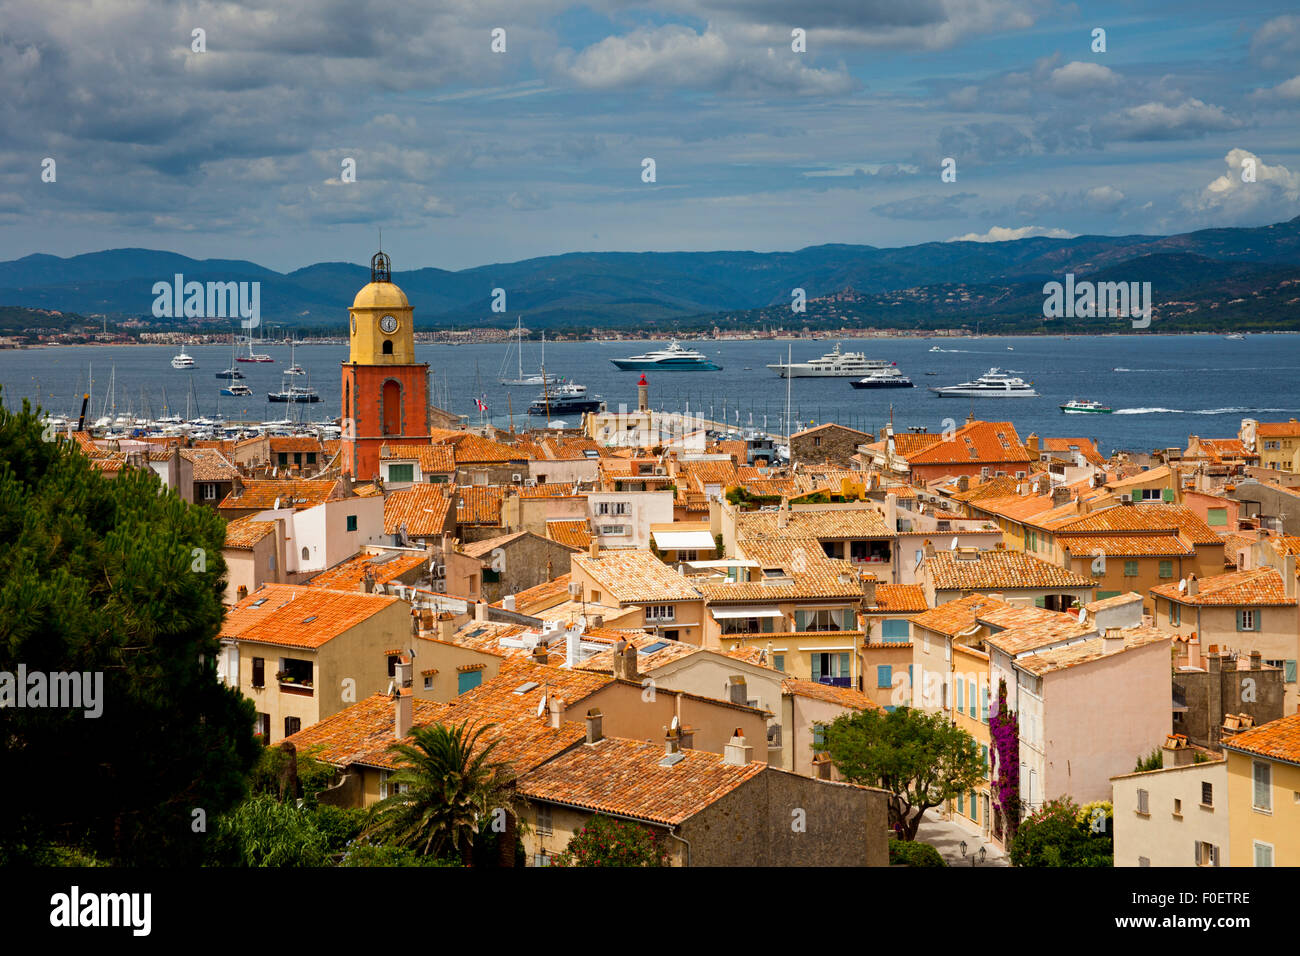 Looking over town to St Tropez harbour with yachts port Côte d'Azur France Stock Photo